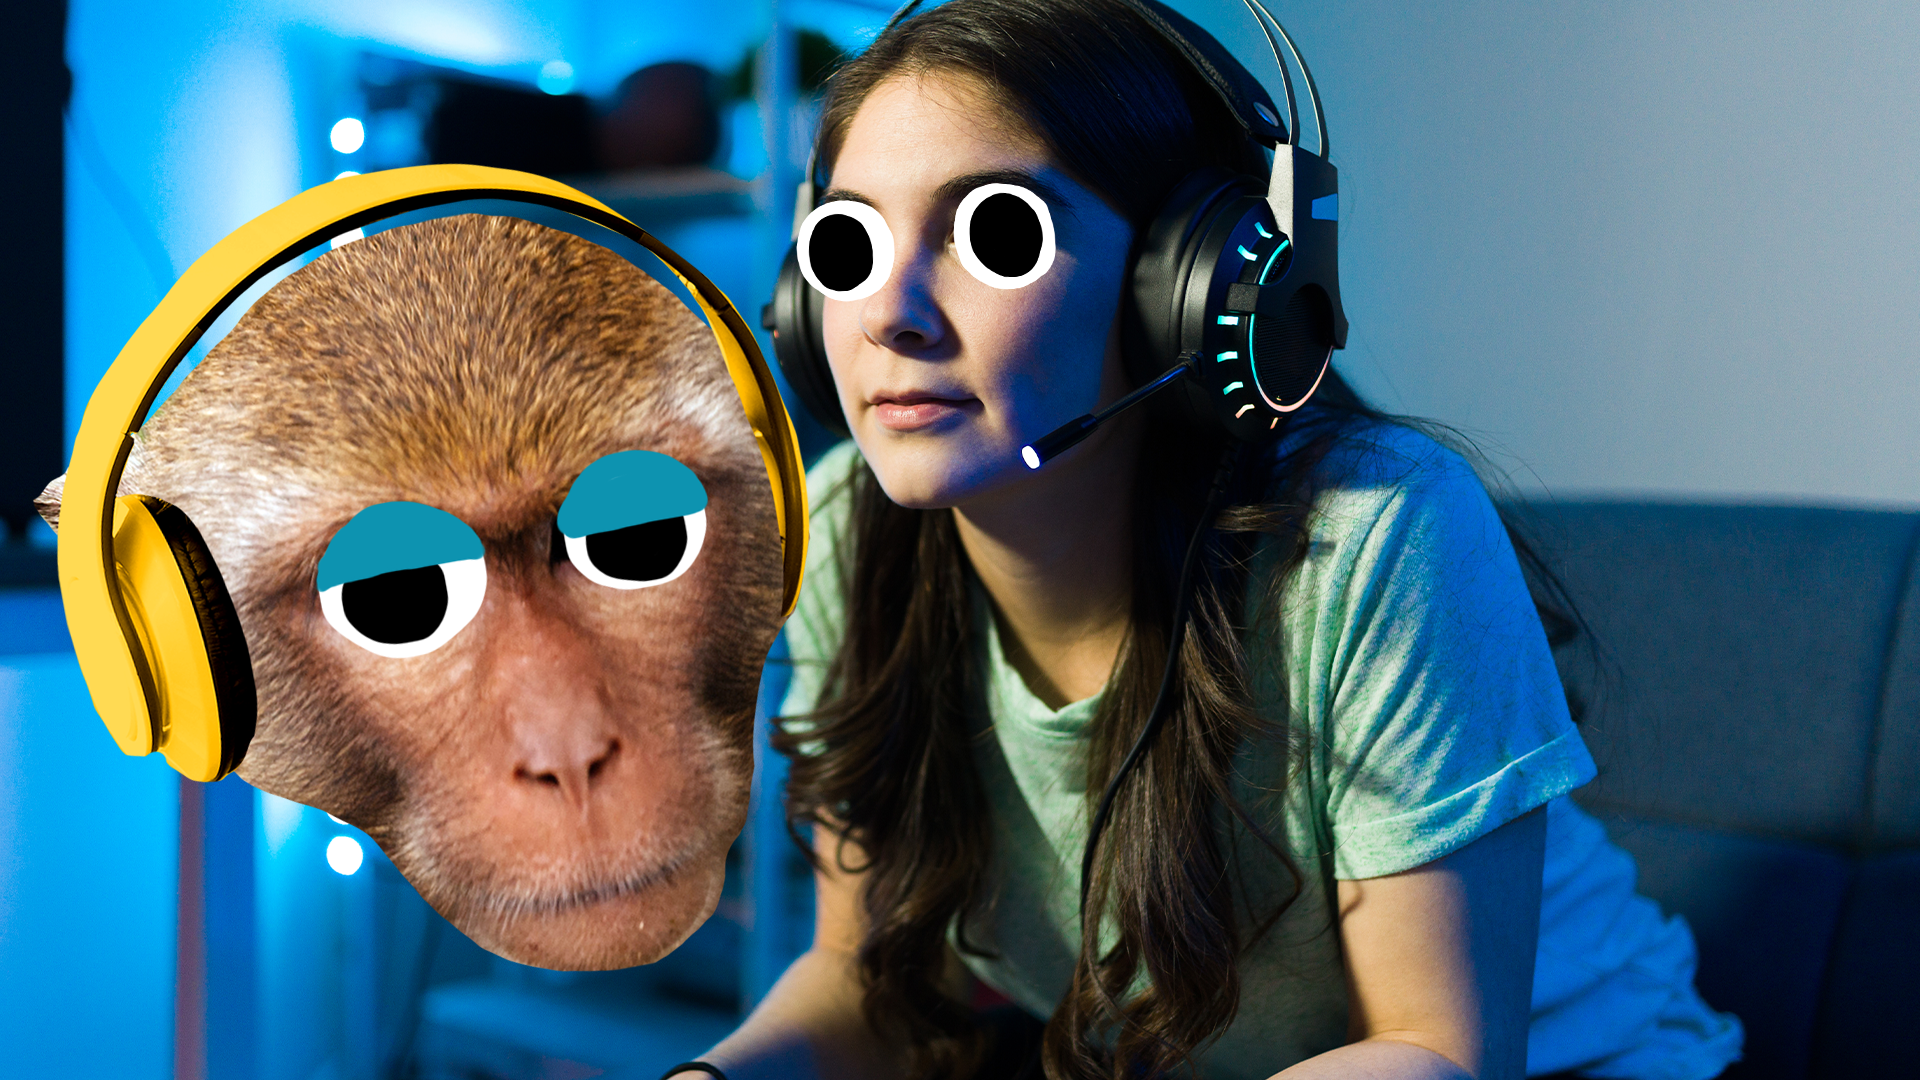 Girl gaming and derpy Beano monkey